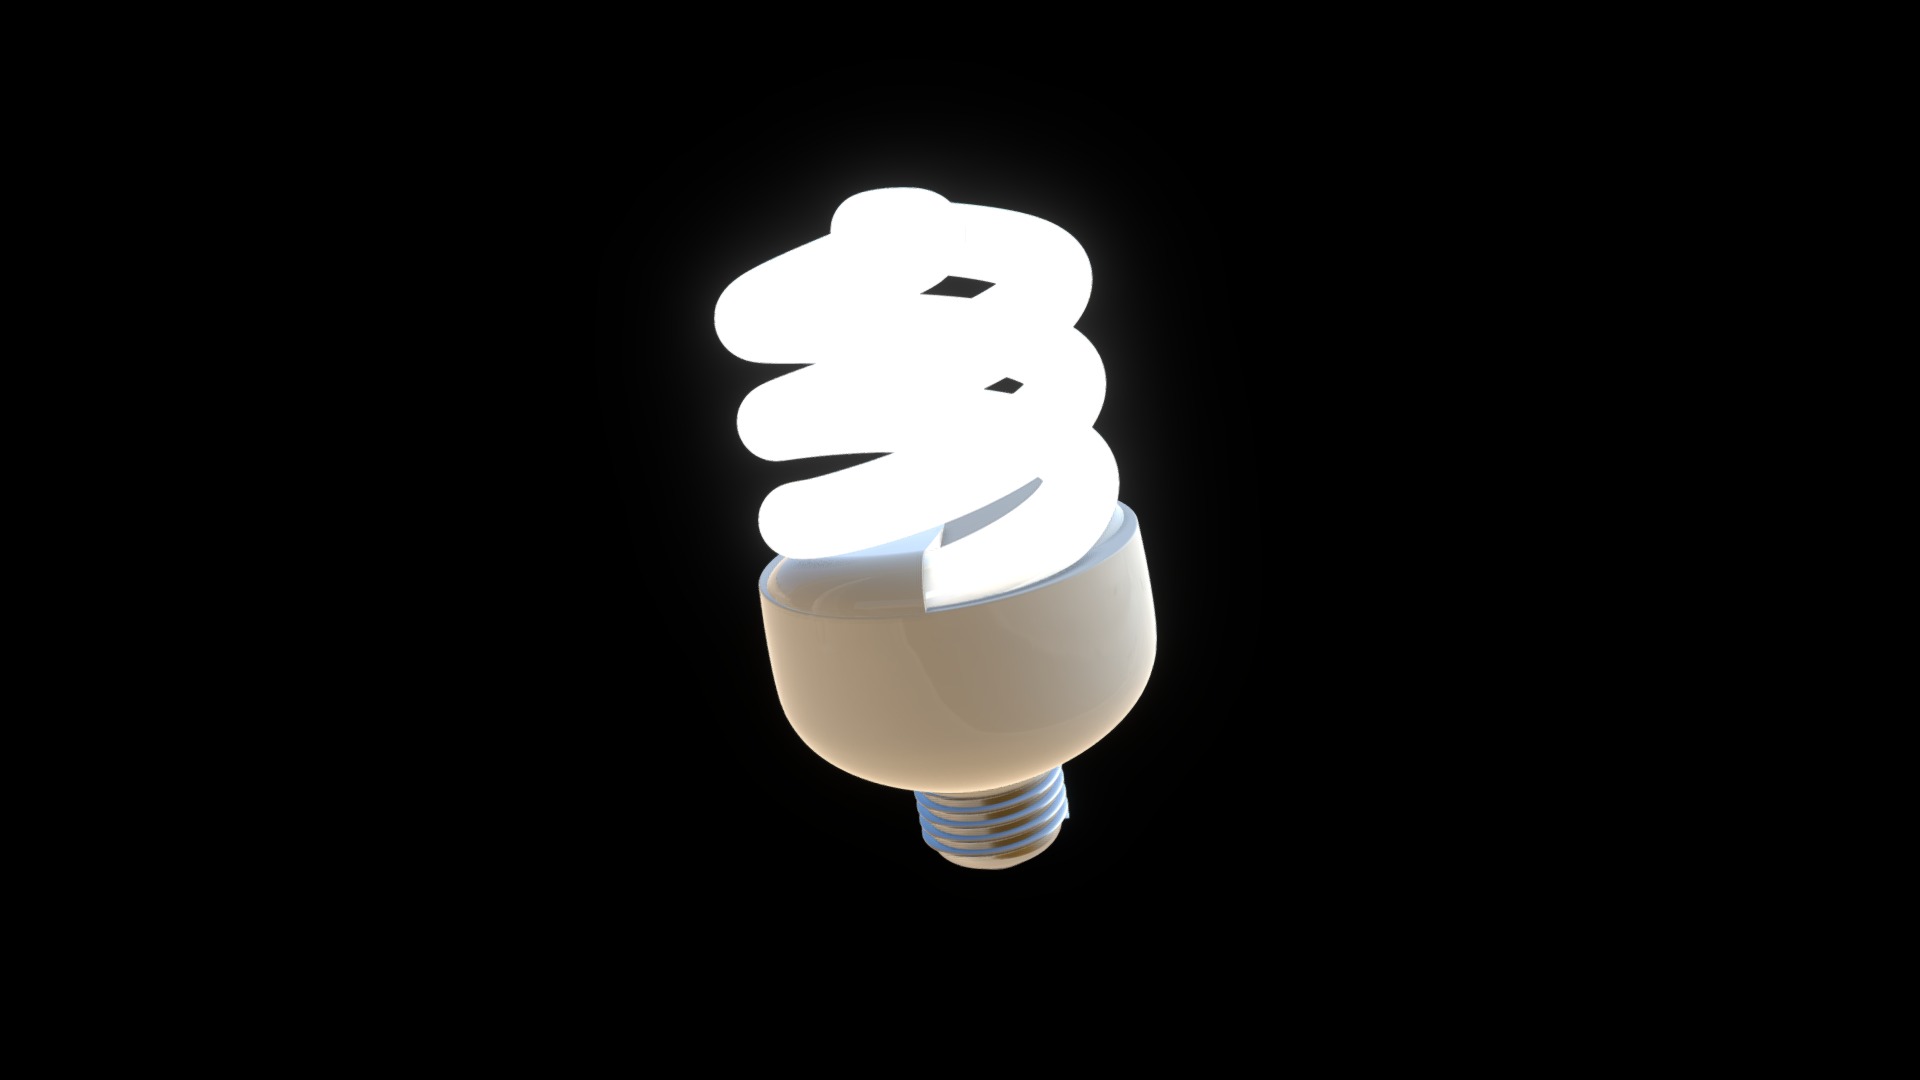 3D model Lampara bajo consumo - This is a 3D model of the Lampara bajo consumo. The 3D model is about a white light bulb.